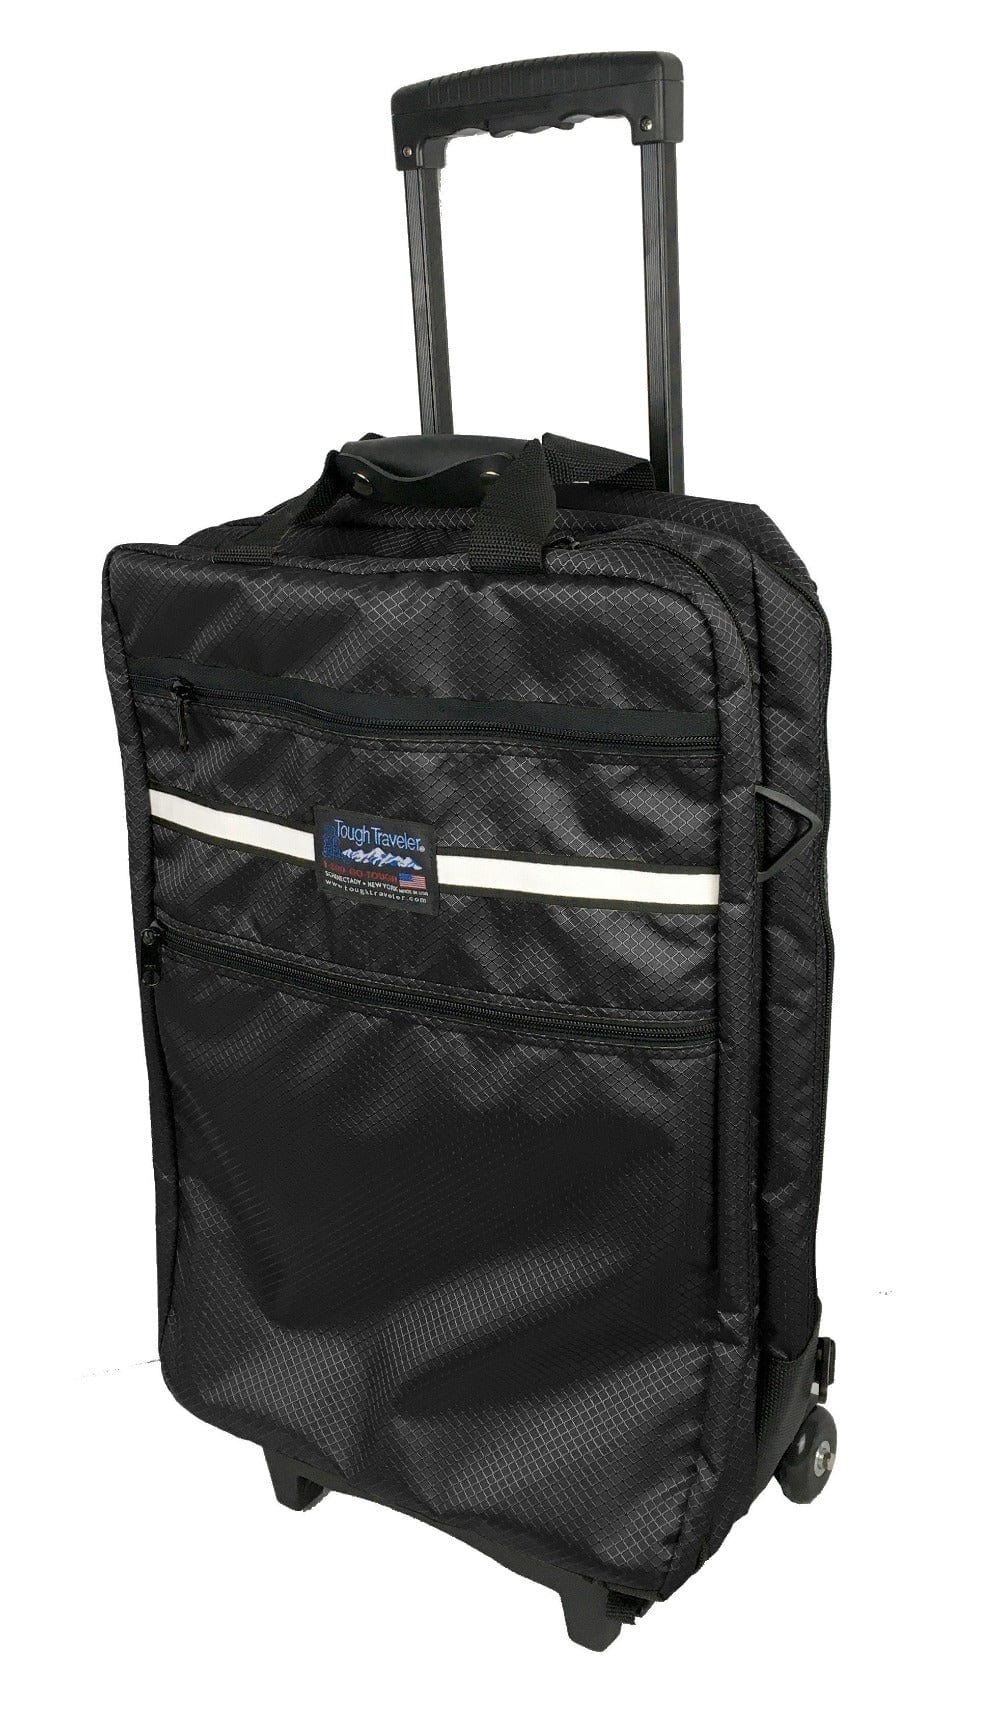 Made in USA CYGNET Fully-Convertible Rolling Carry-On Wheeled Bags